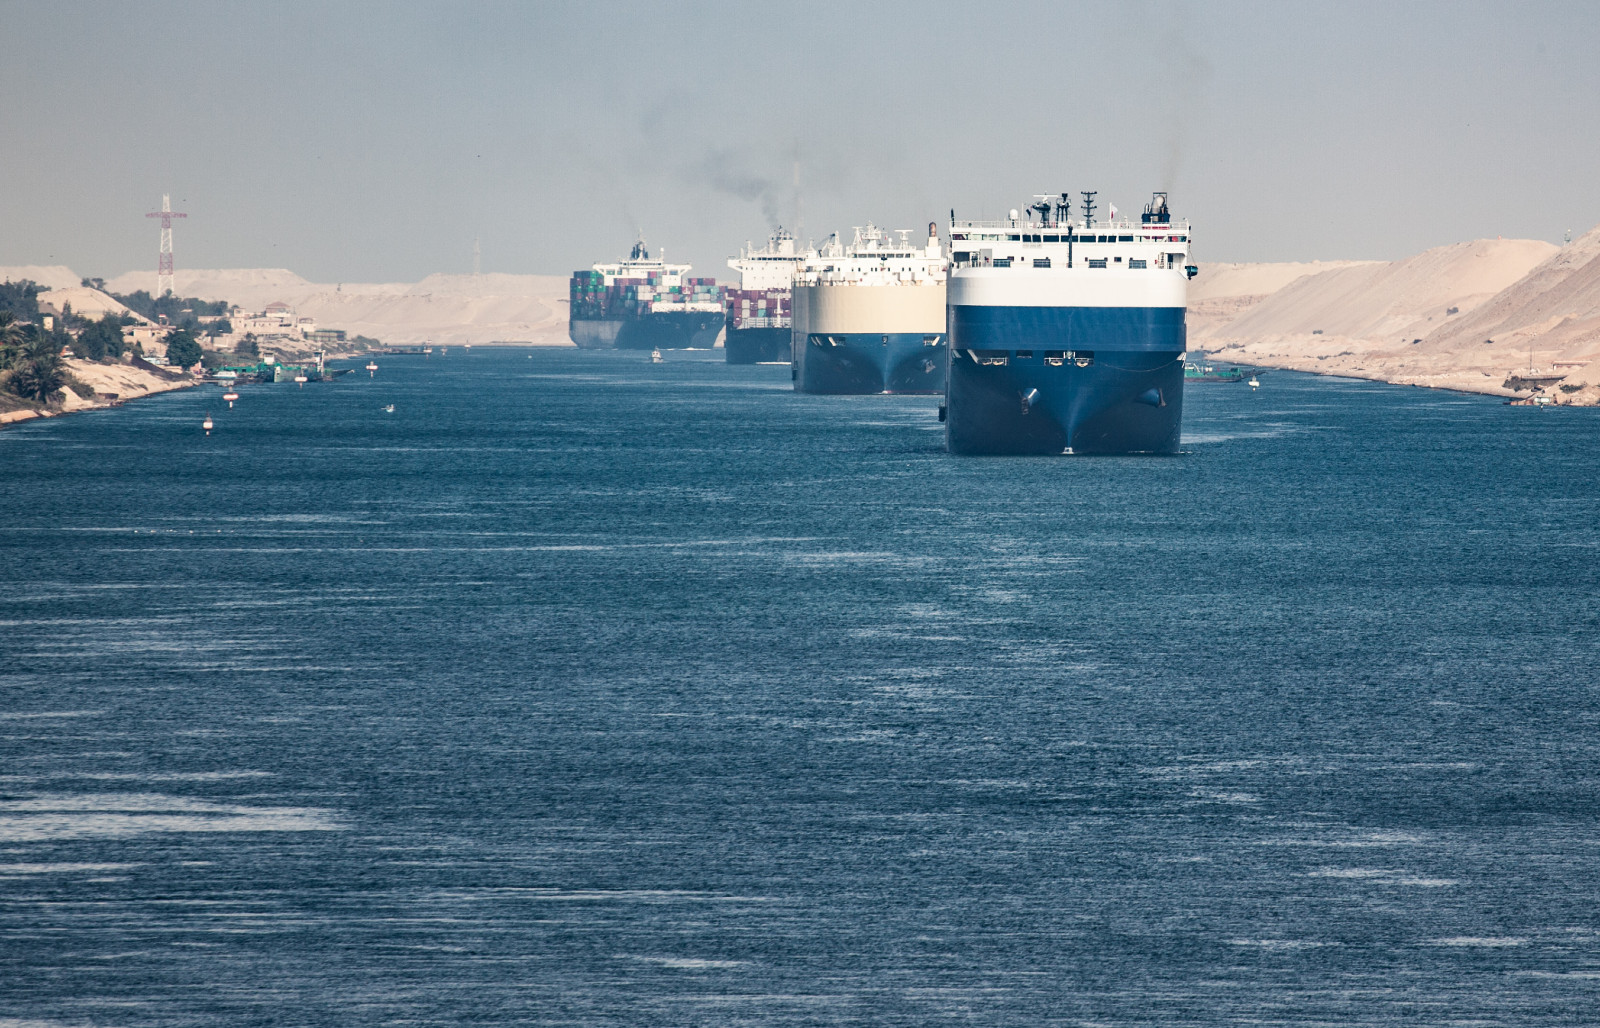 Egypt: Suez Canal authority raises transit fees for oil tankers to 15%